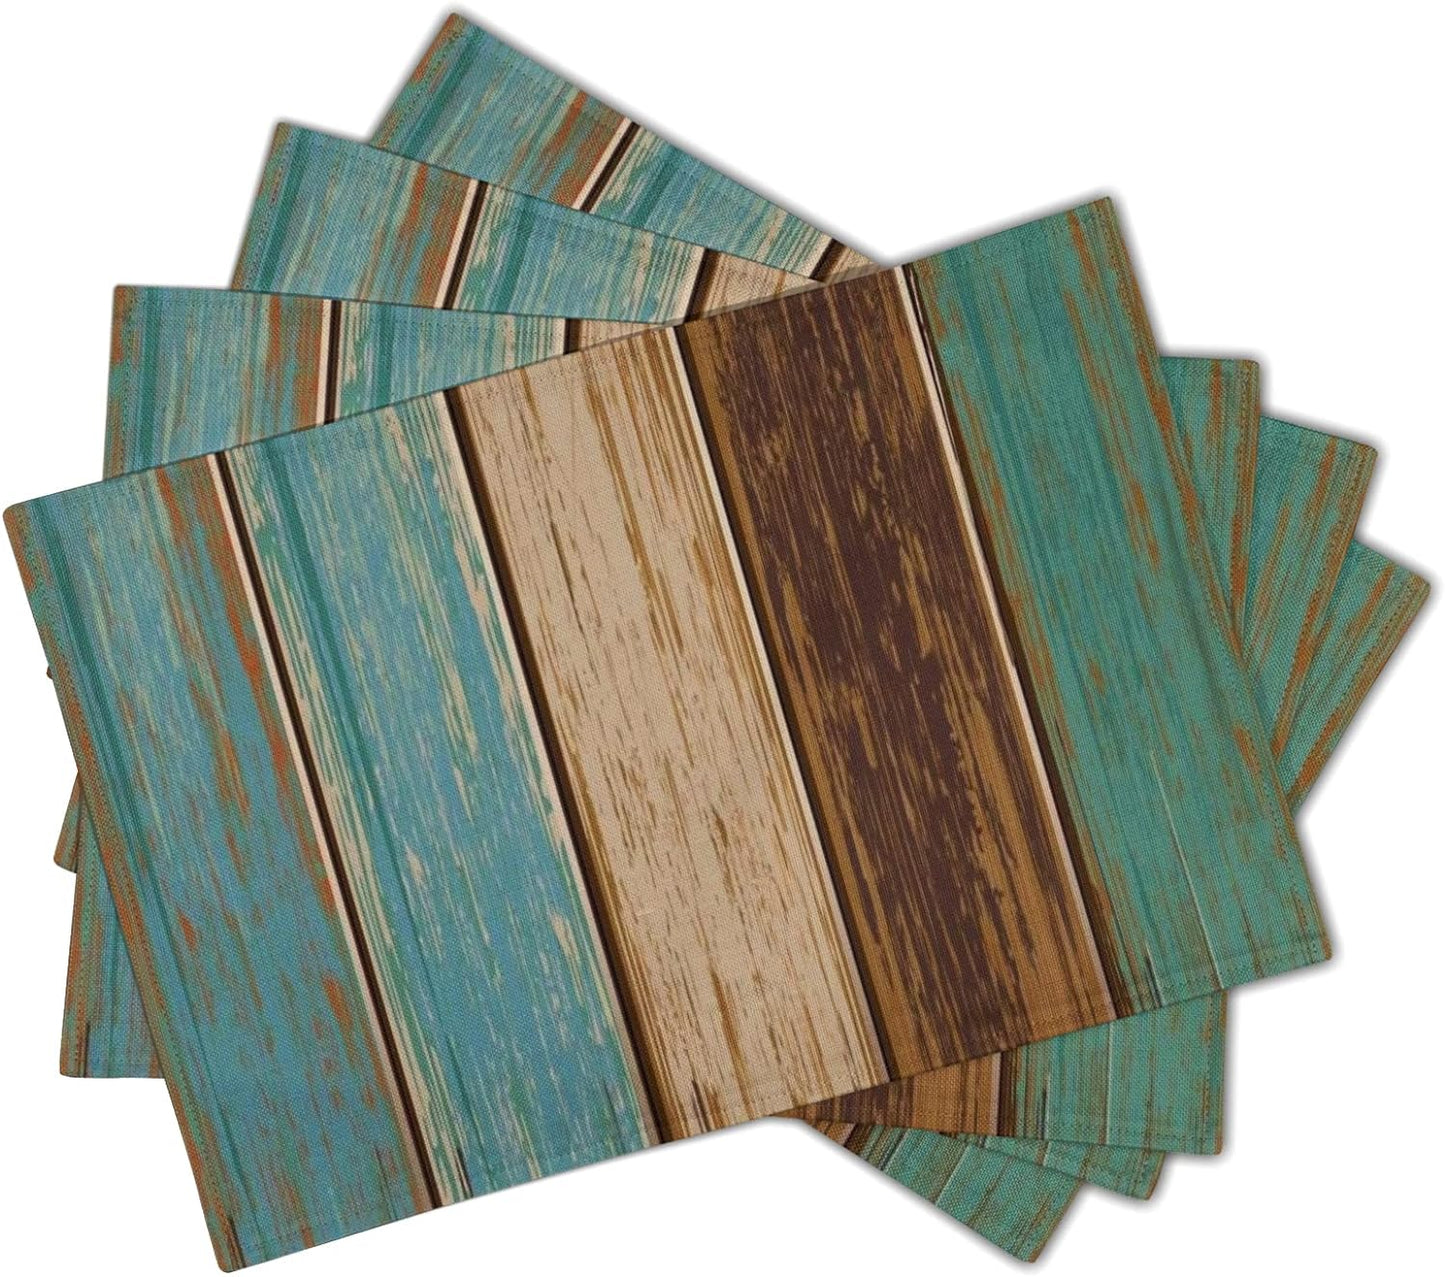 Stitchkozy Vintage Wood Placemats Rustic Teal Brown Vertical Striped Wooden Table Mat Set of 4 Farmhouse Lodge Grain Heat Resistant Linen Place Mats for Dining Kitchen Party Decor 12x18Inch